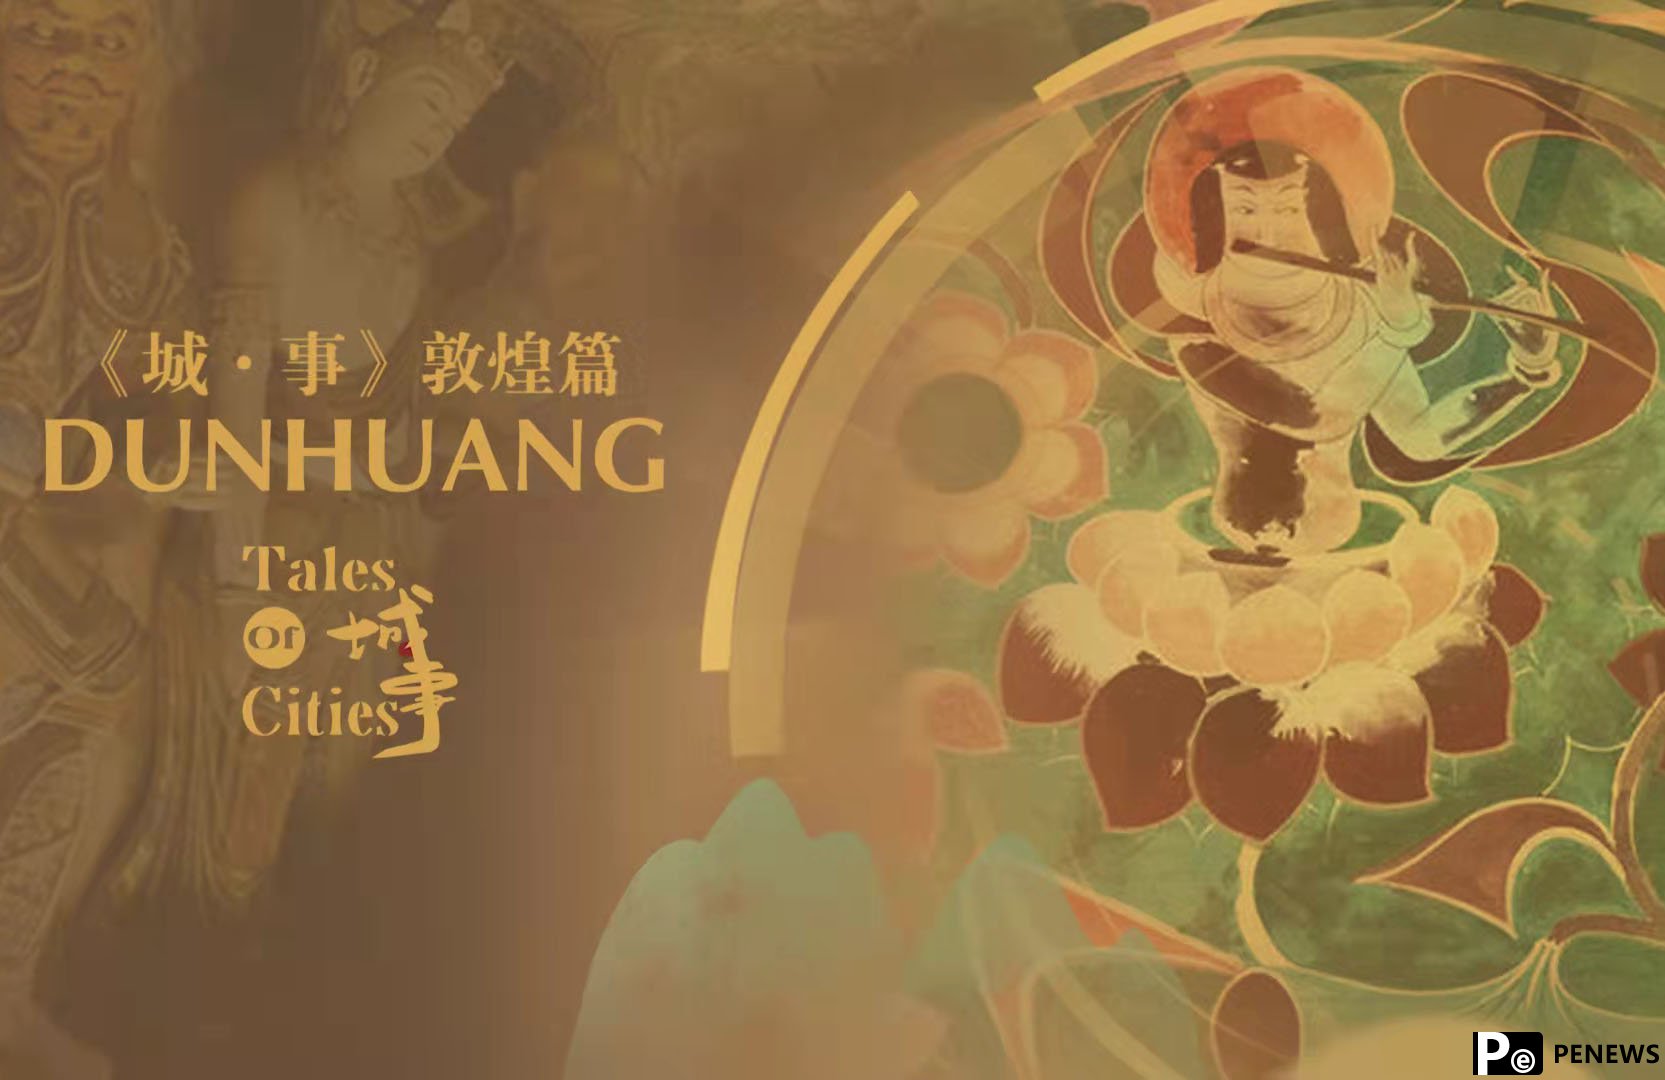 Trailer: Journey to Dunhuang kicks up the shifting sands of time